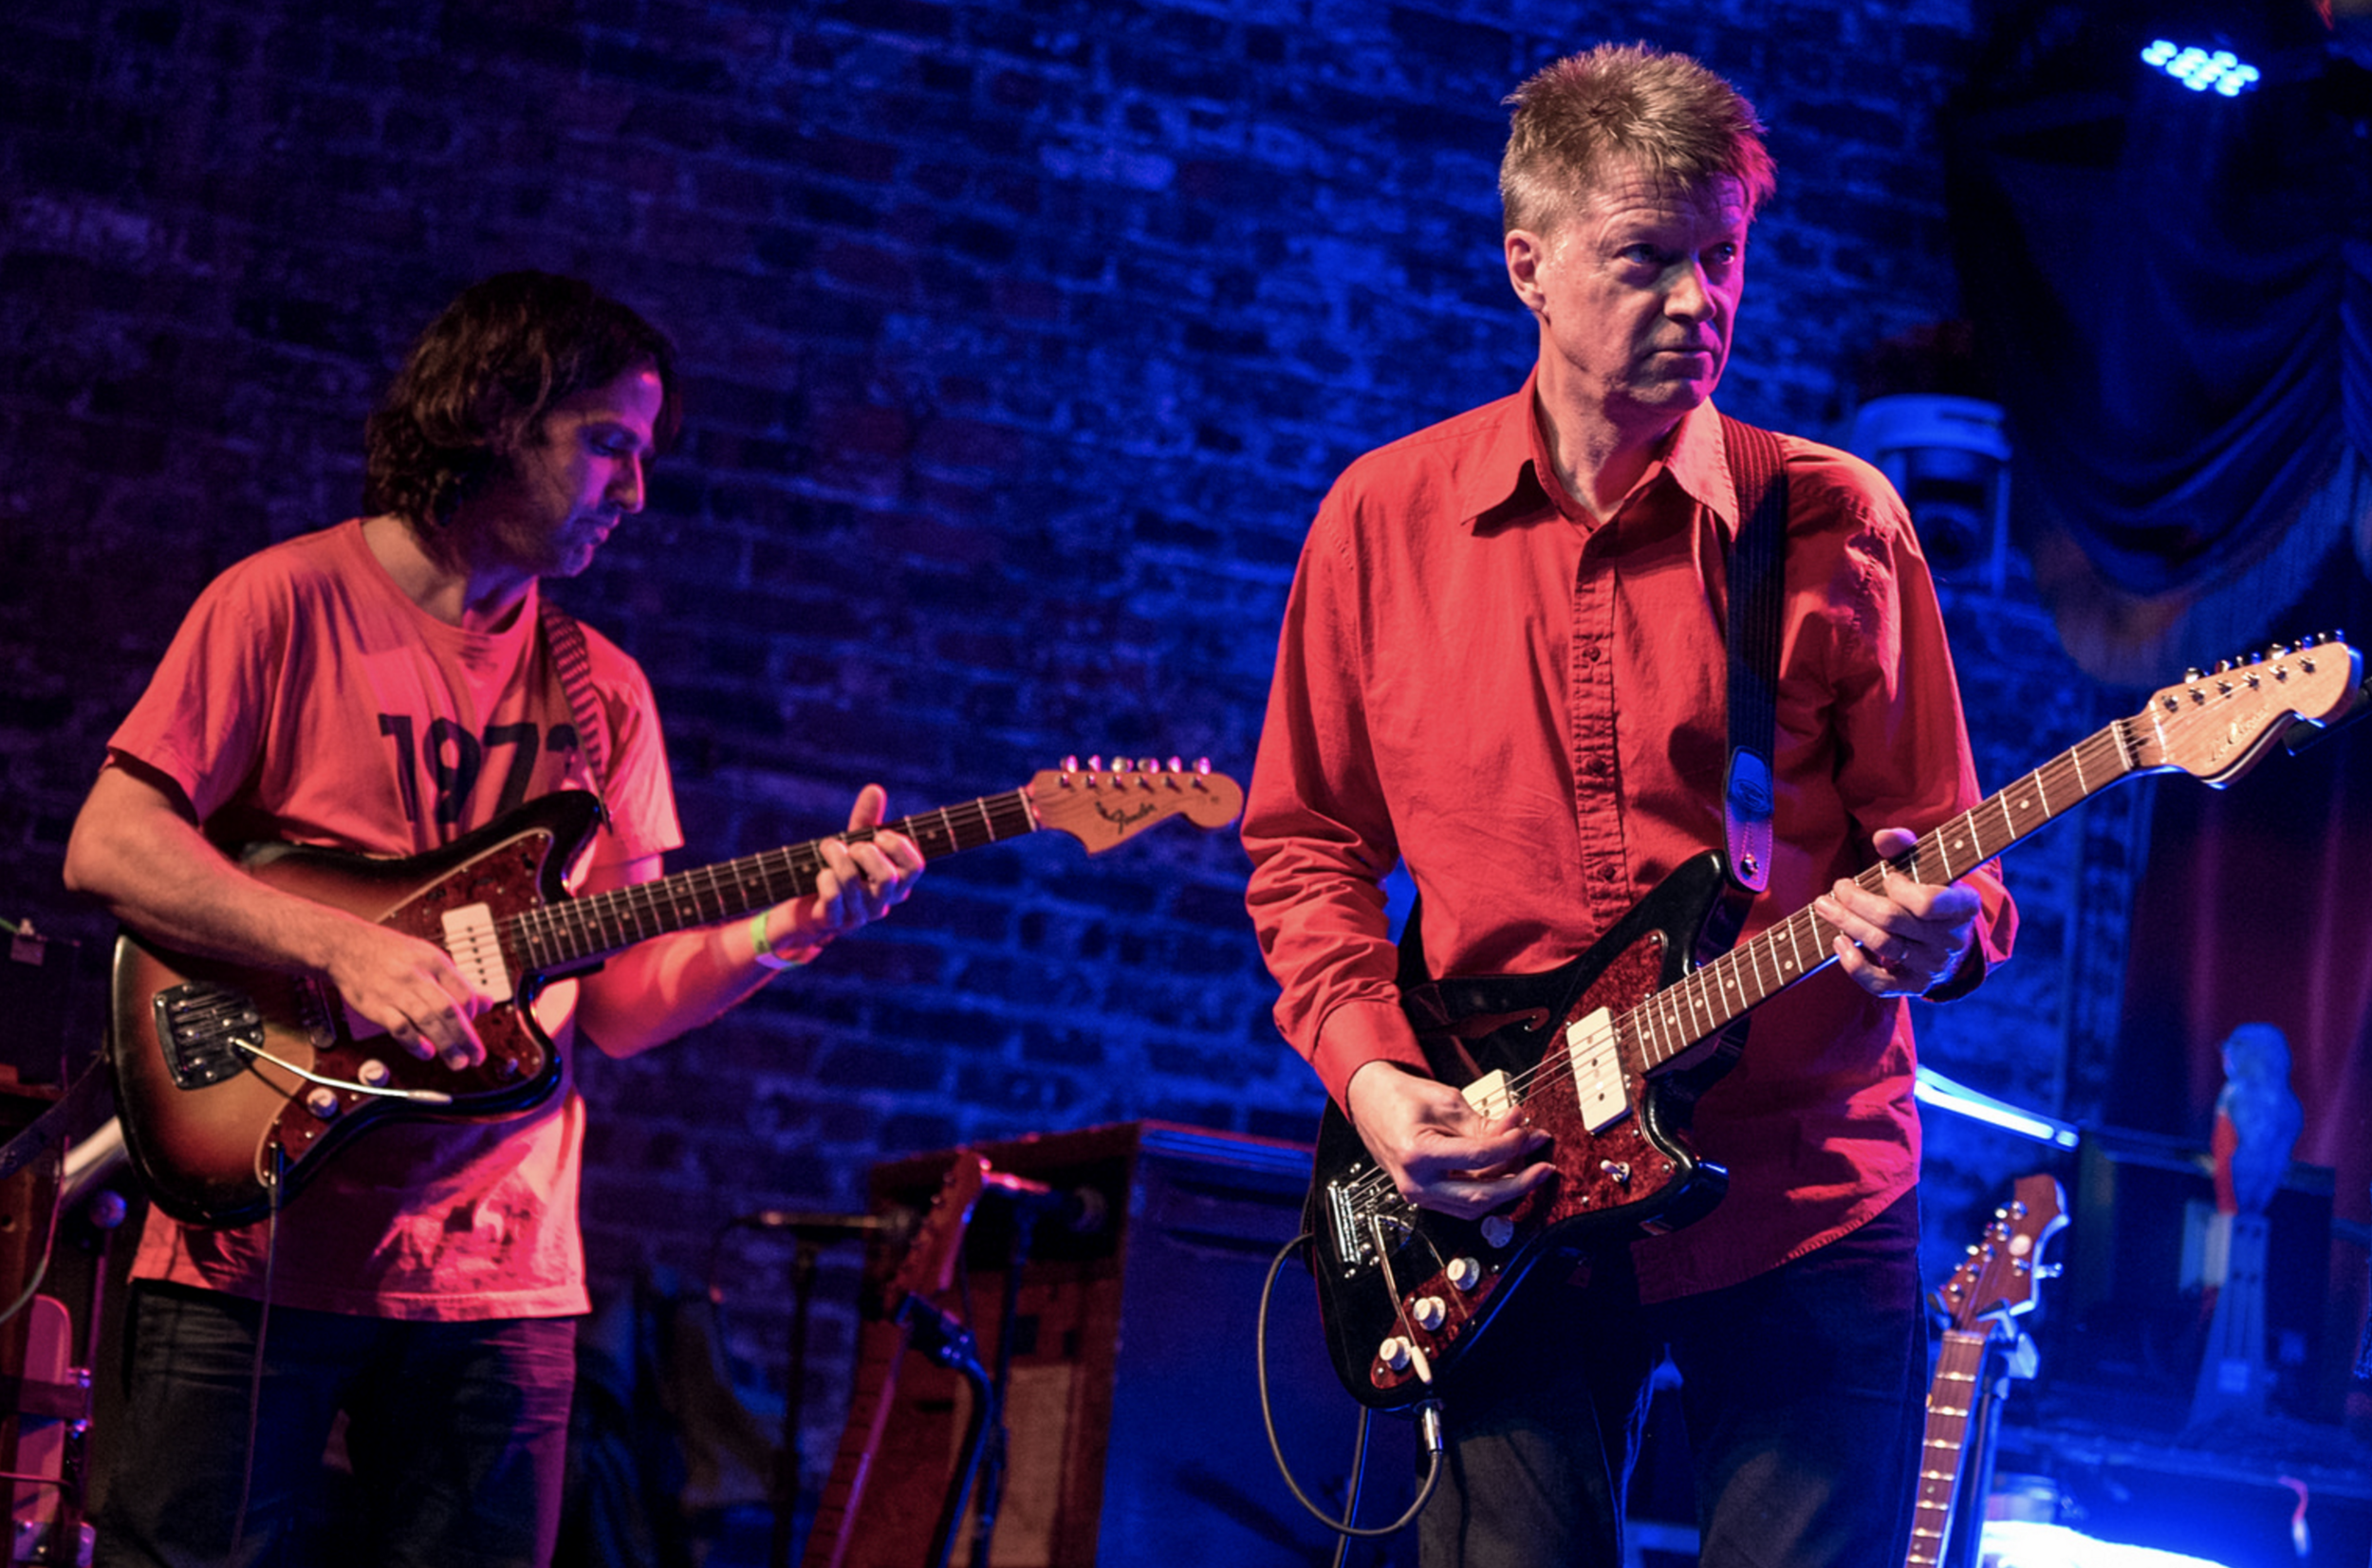 With Nels Cline. NYC 5/2017